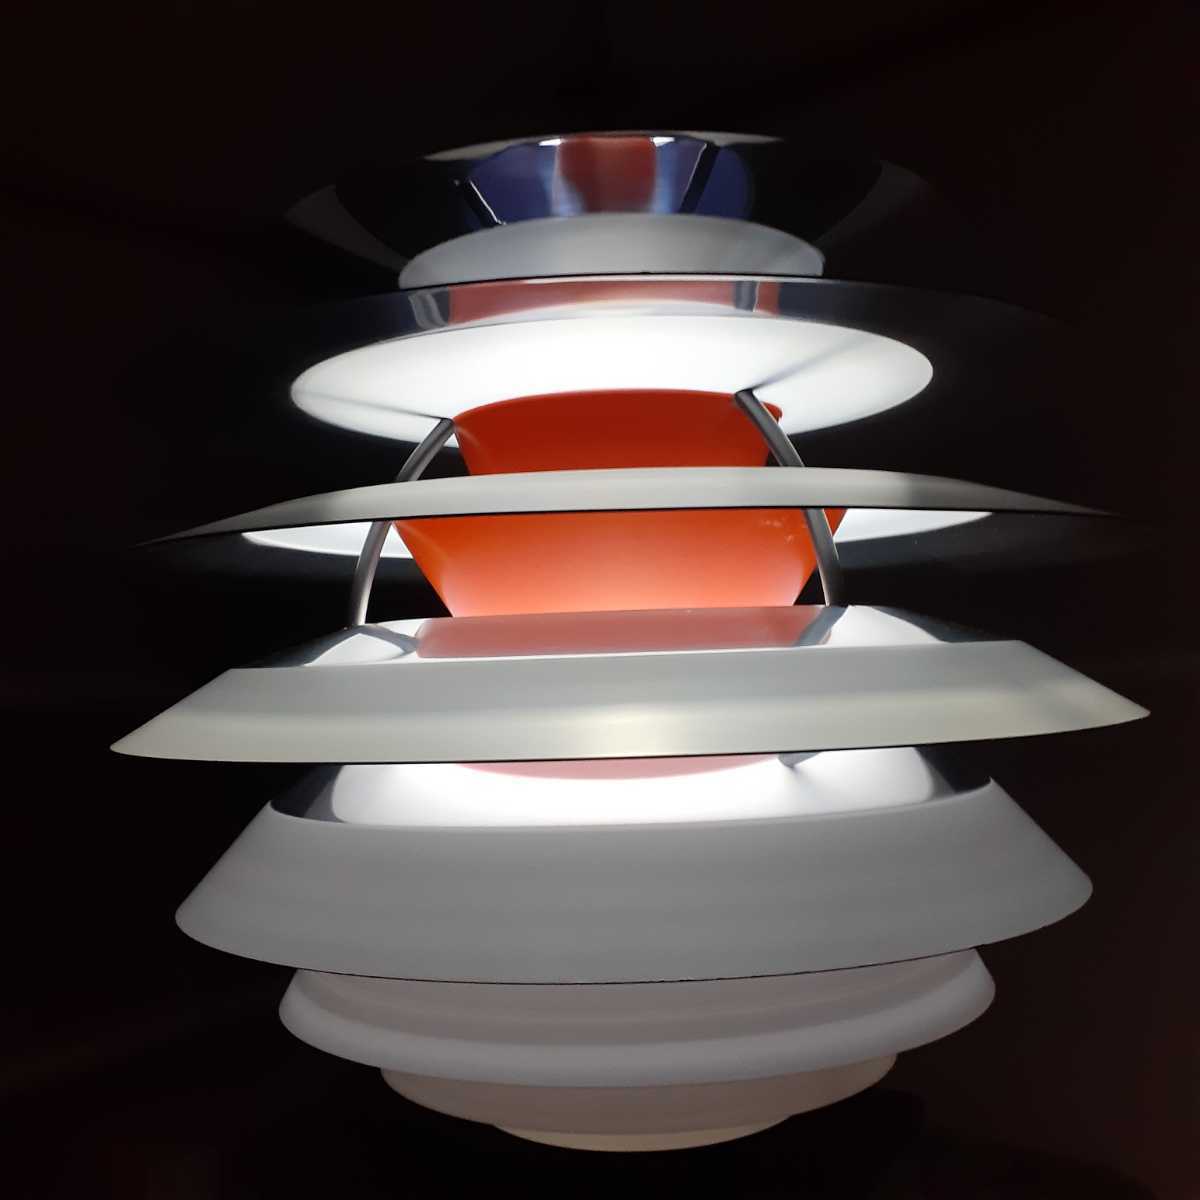 『PH Kontrast』Pendant Lamp by Poul Henningsen for Louis Poulsen◆ルイスポールセン ウェグナー フリッツハンセン 北欧ヴィンテージ